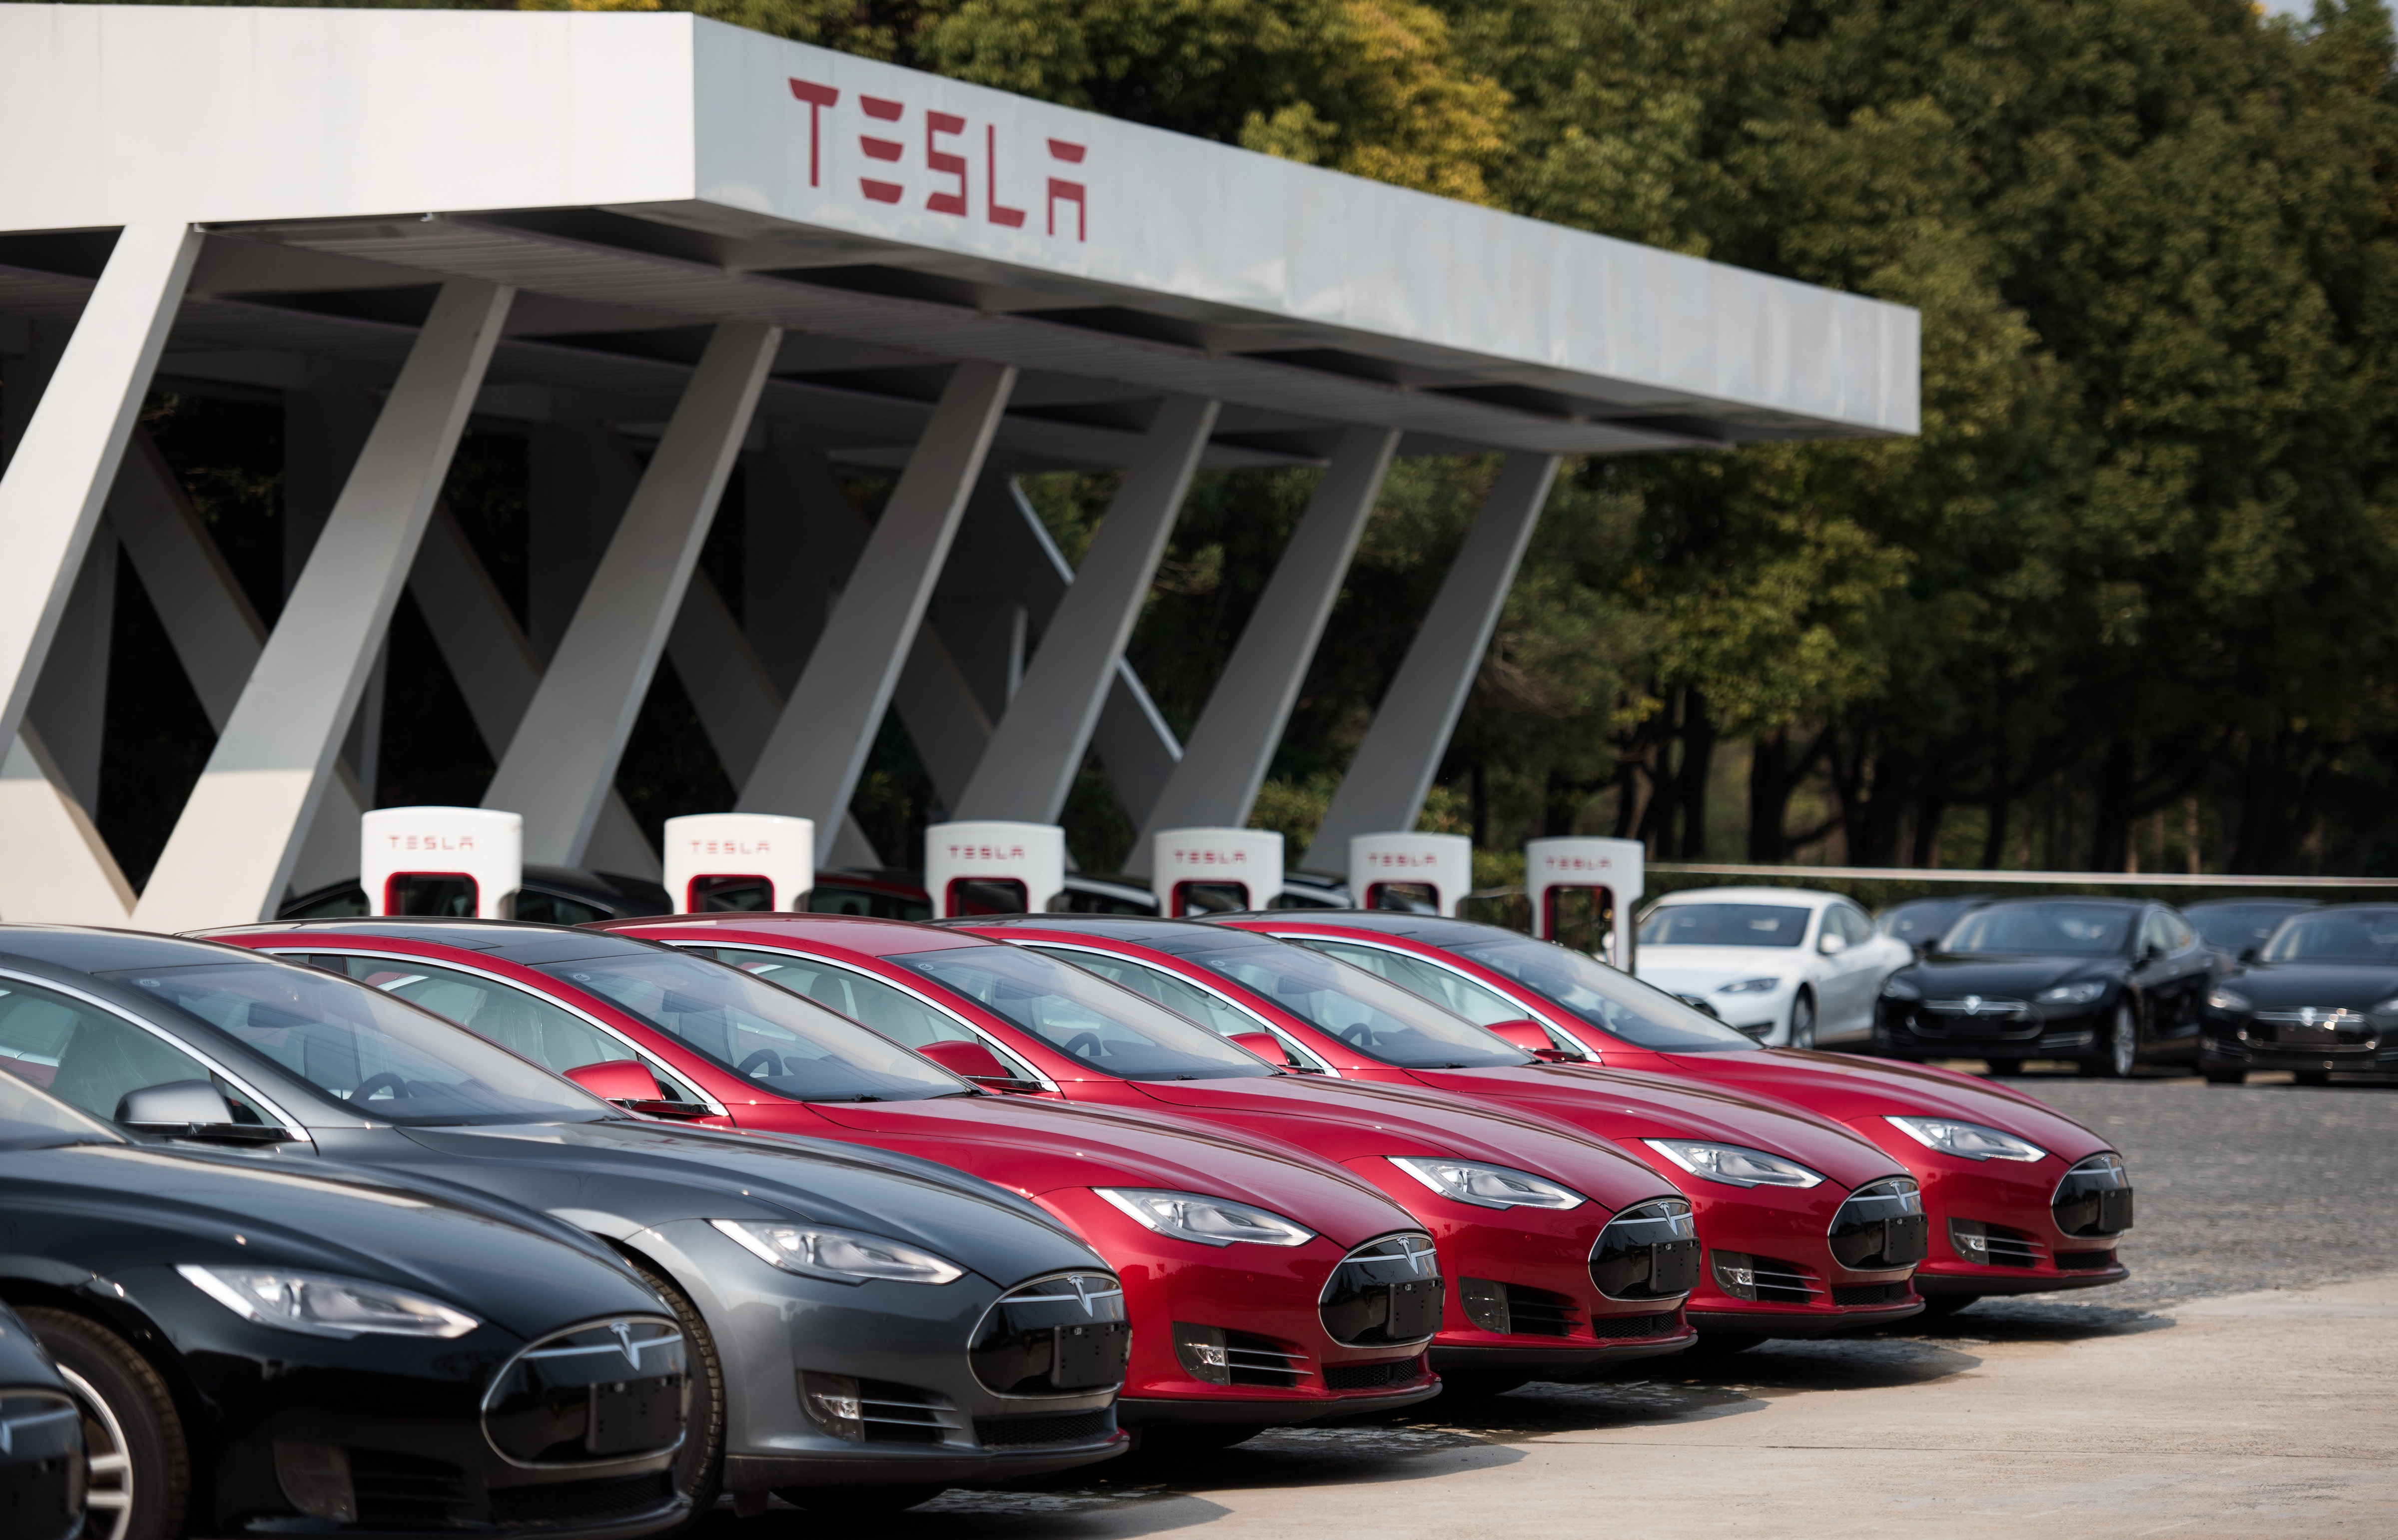 Why Tesla’s Planned China Price Hikes Shouldn’t Worry Investors